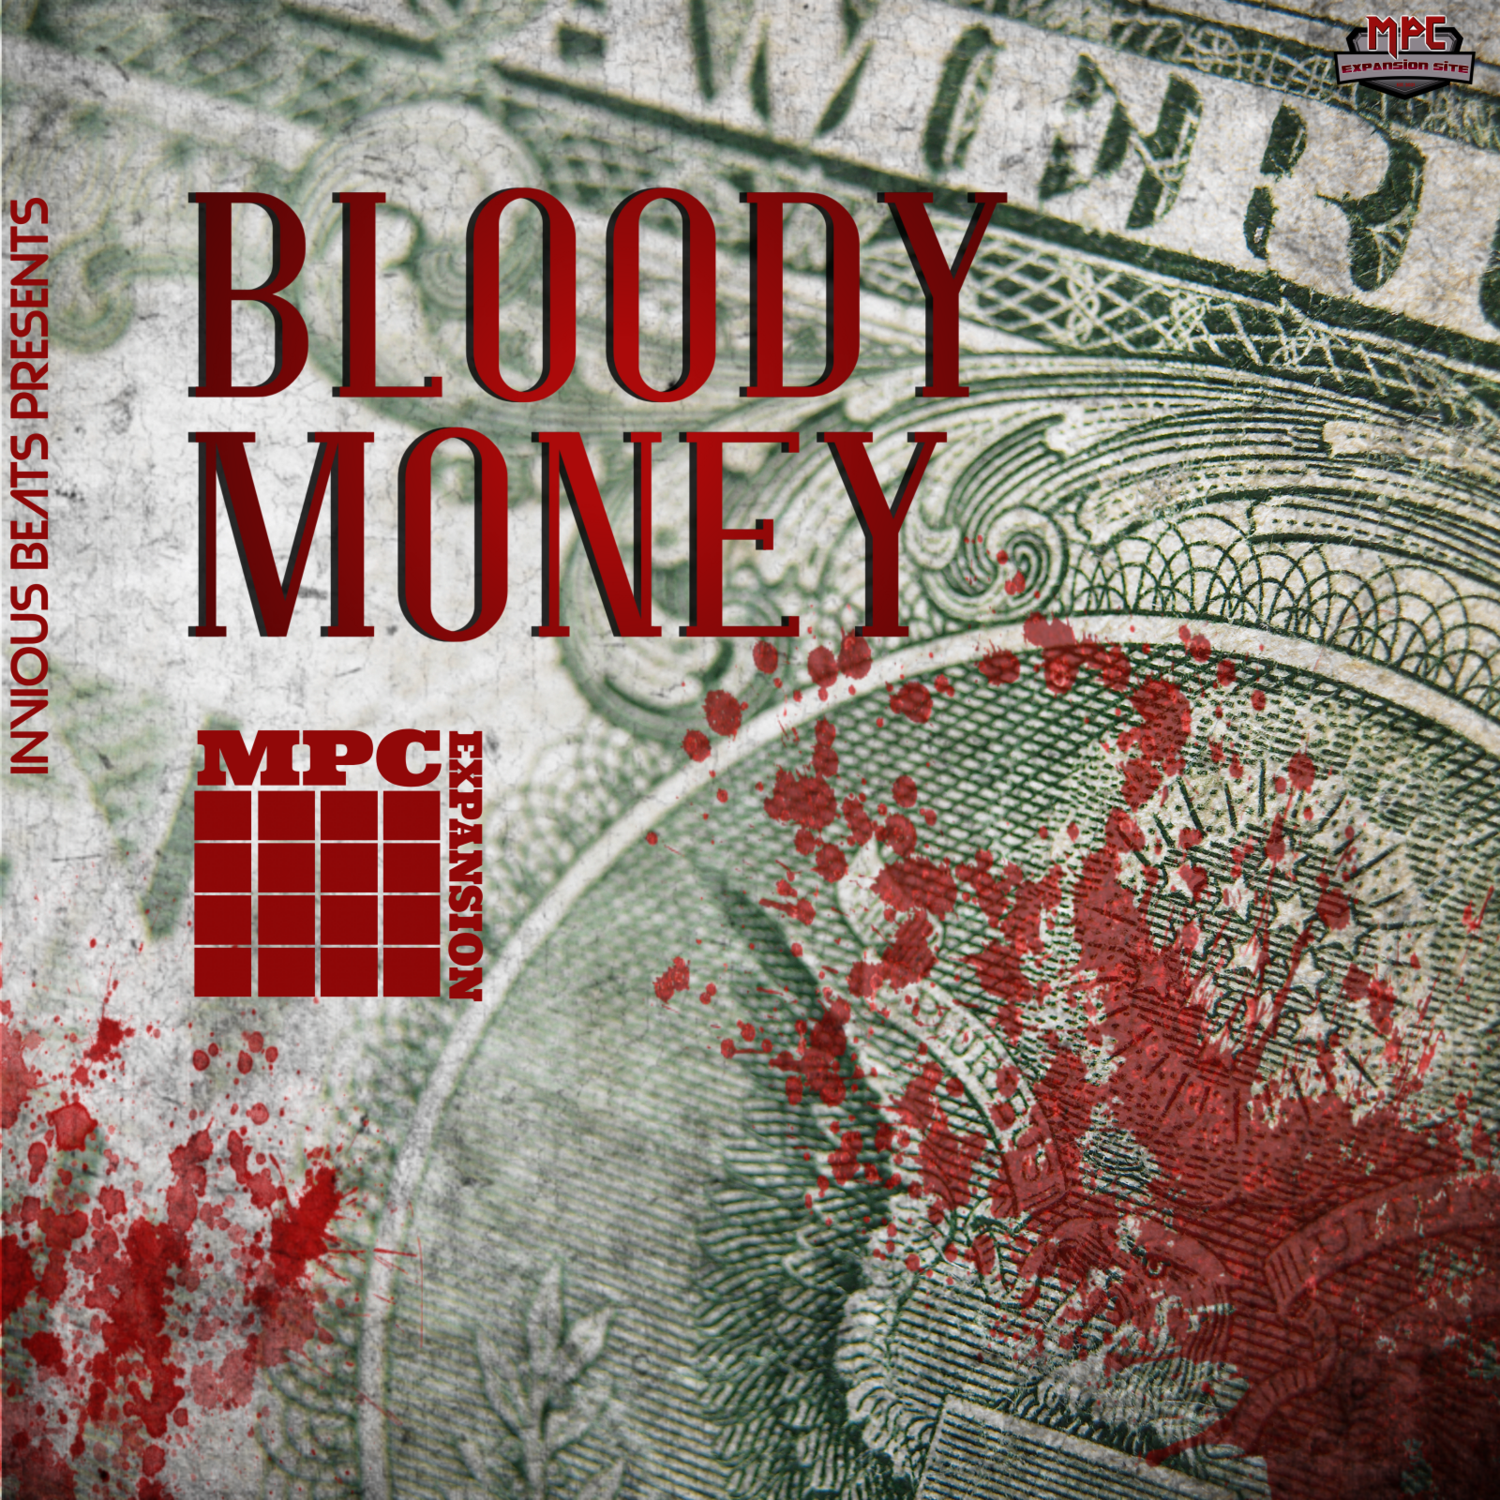 MPC EXPANSION 'BLOODY MONEY' by INVIOUS